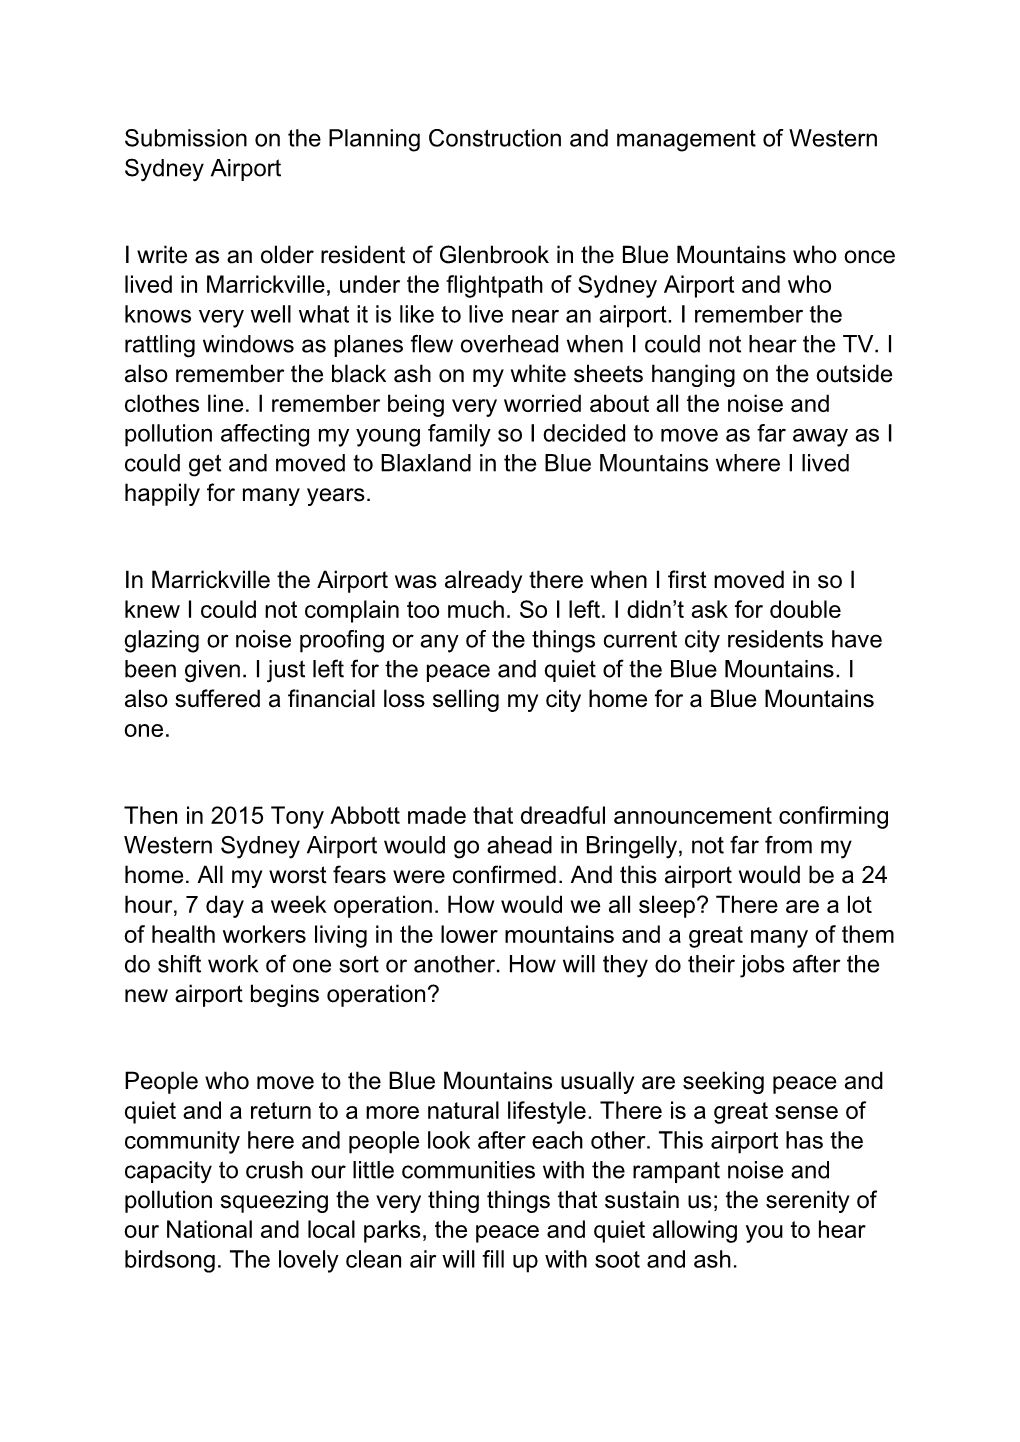 Submission on the Planning Construction and Management of Western Sydney Airport I Write As an Older Resident of Glenbrook in Th